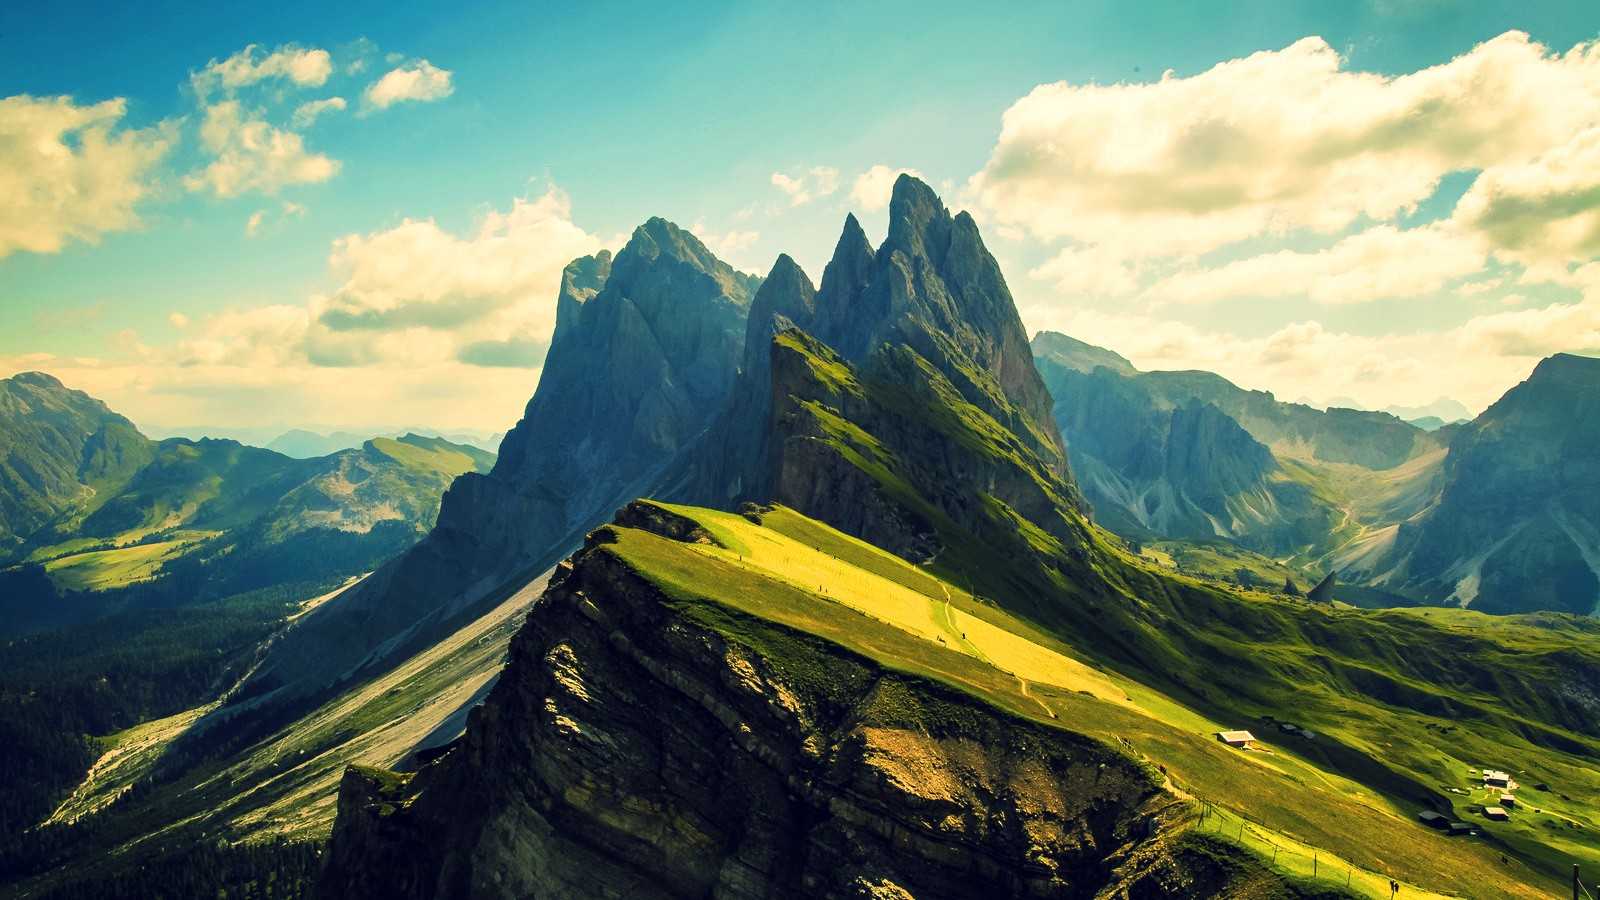 Download Mountain Wallpaper Image Photo Background